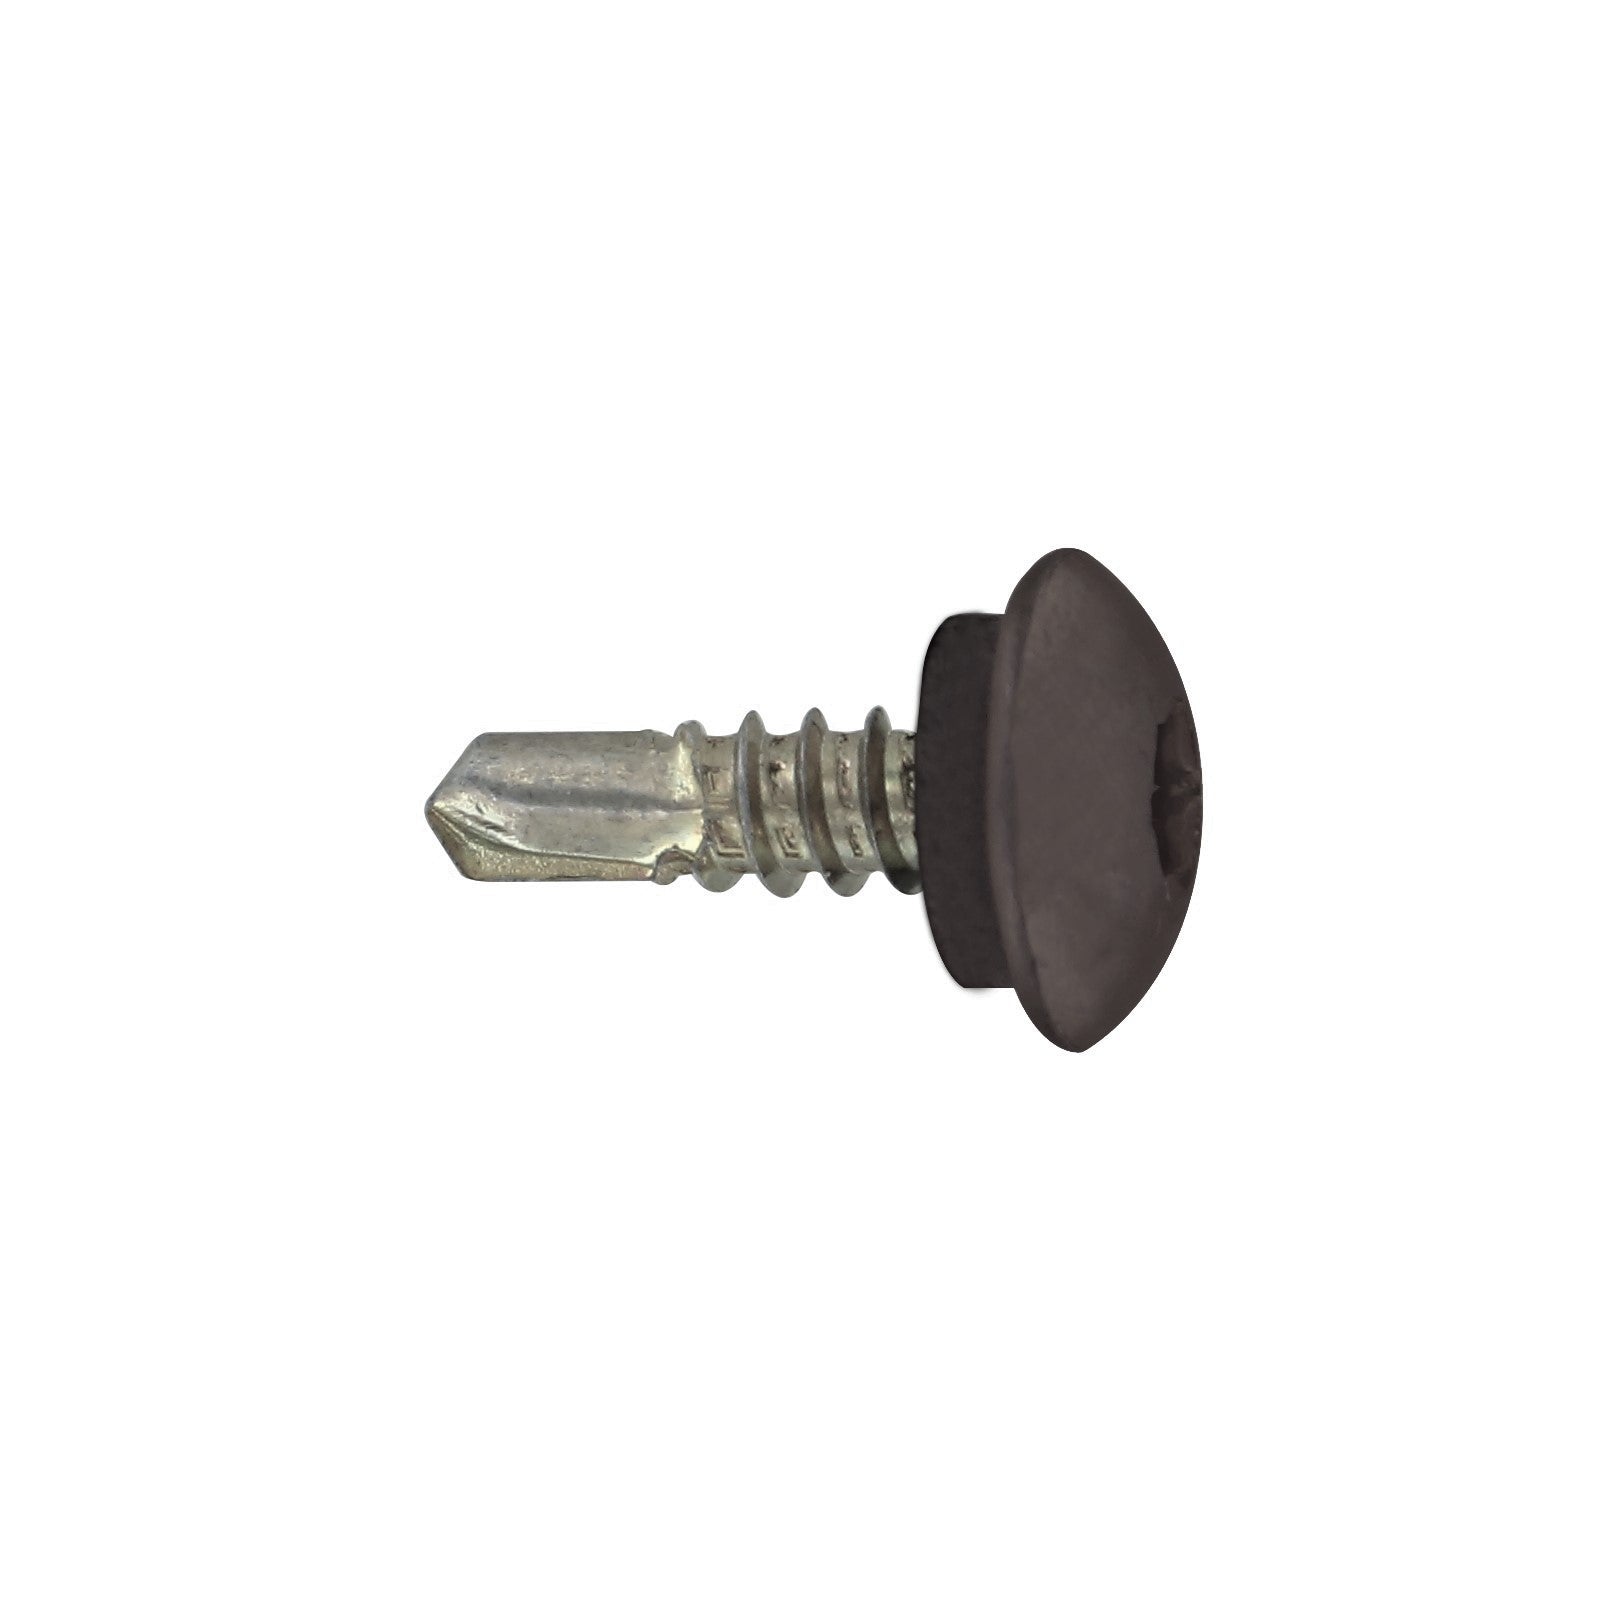 #1214 x 34 inch Eclipse Steelbinder Metal Roofing Screw Charcoal Gray Pkg 250 image 1 of 2